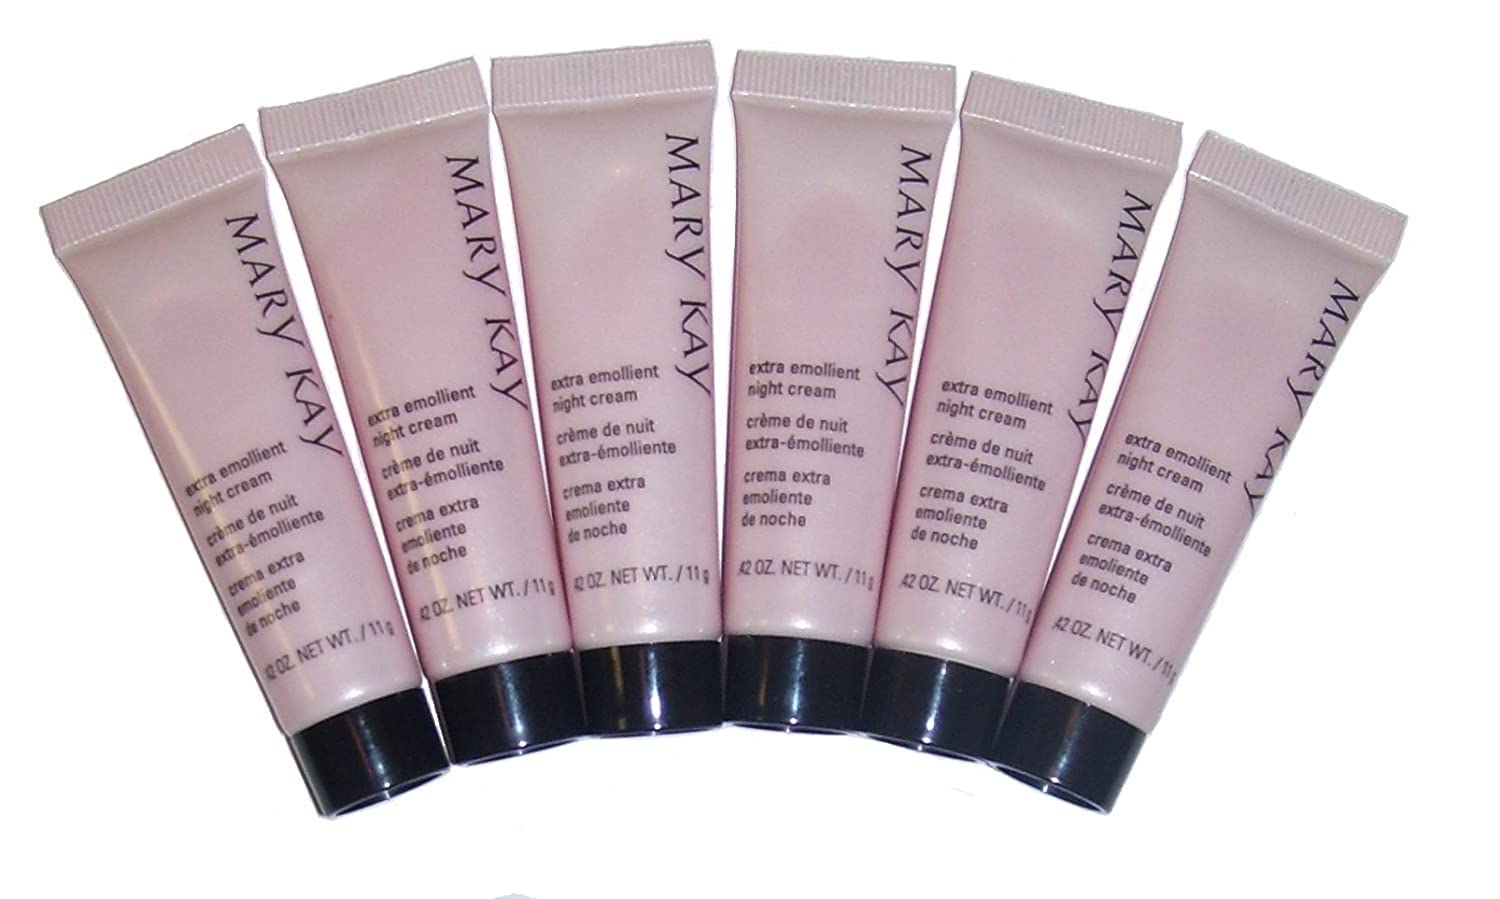 Mary Kay Extra Emollient Night Cream - Lot of 6, Travel Size, Whole Body Moisturizer for Dry Skin, 2.52